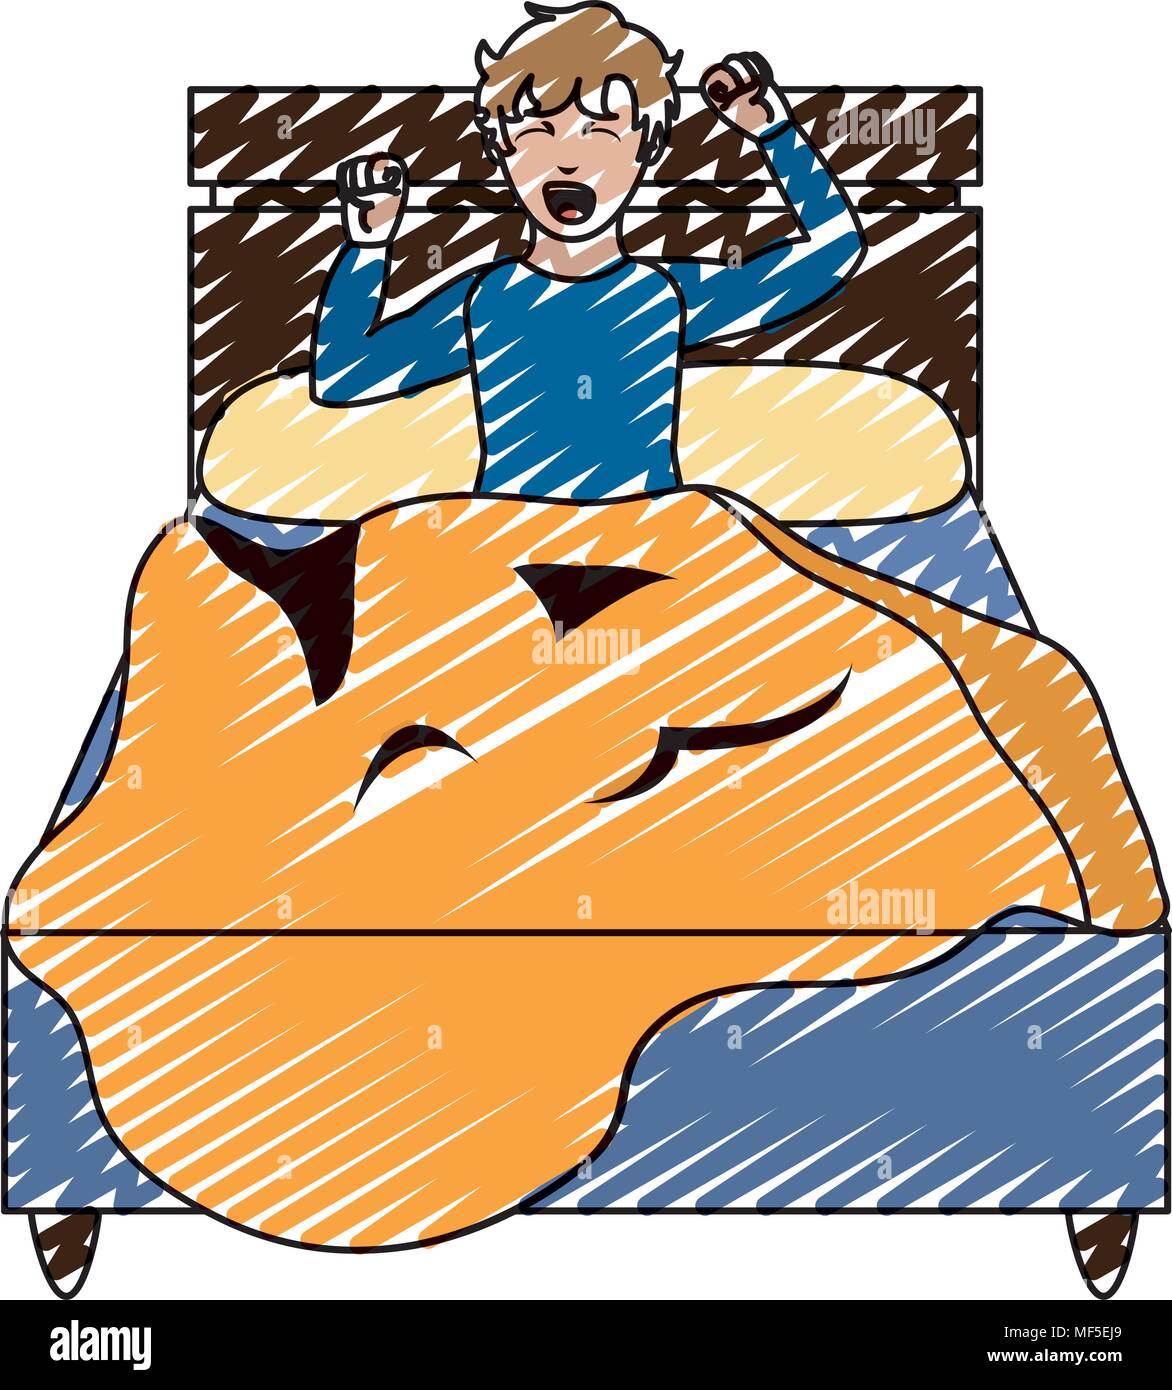 doodle man in the bed wakuing up with pijama design Stock Vector